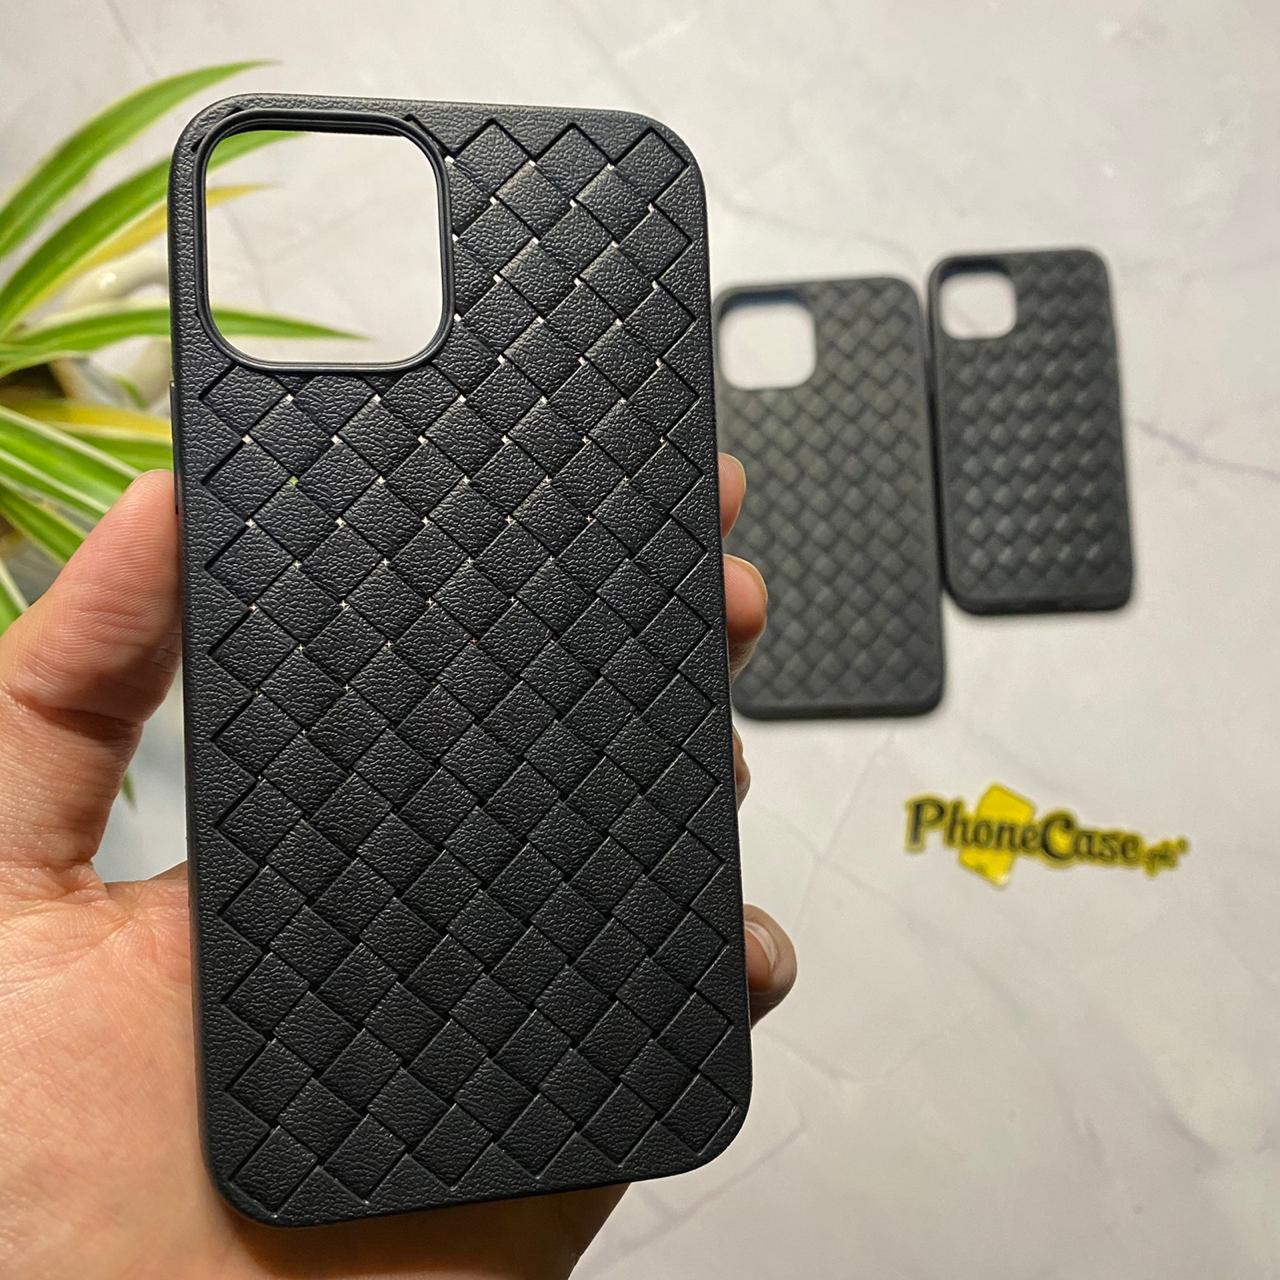 Leather Feel Mesh Shock Proof Case For All iPhone Models